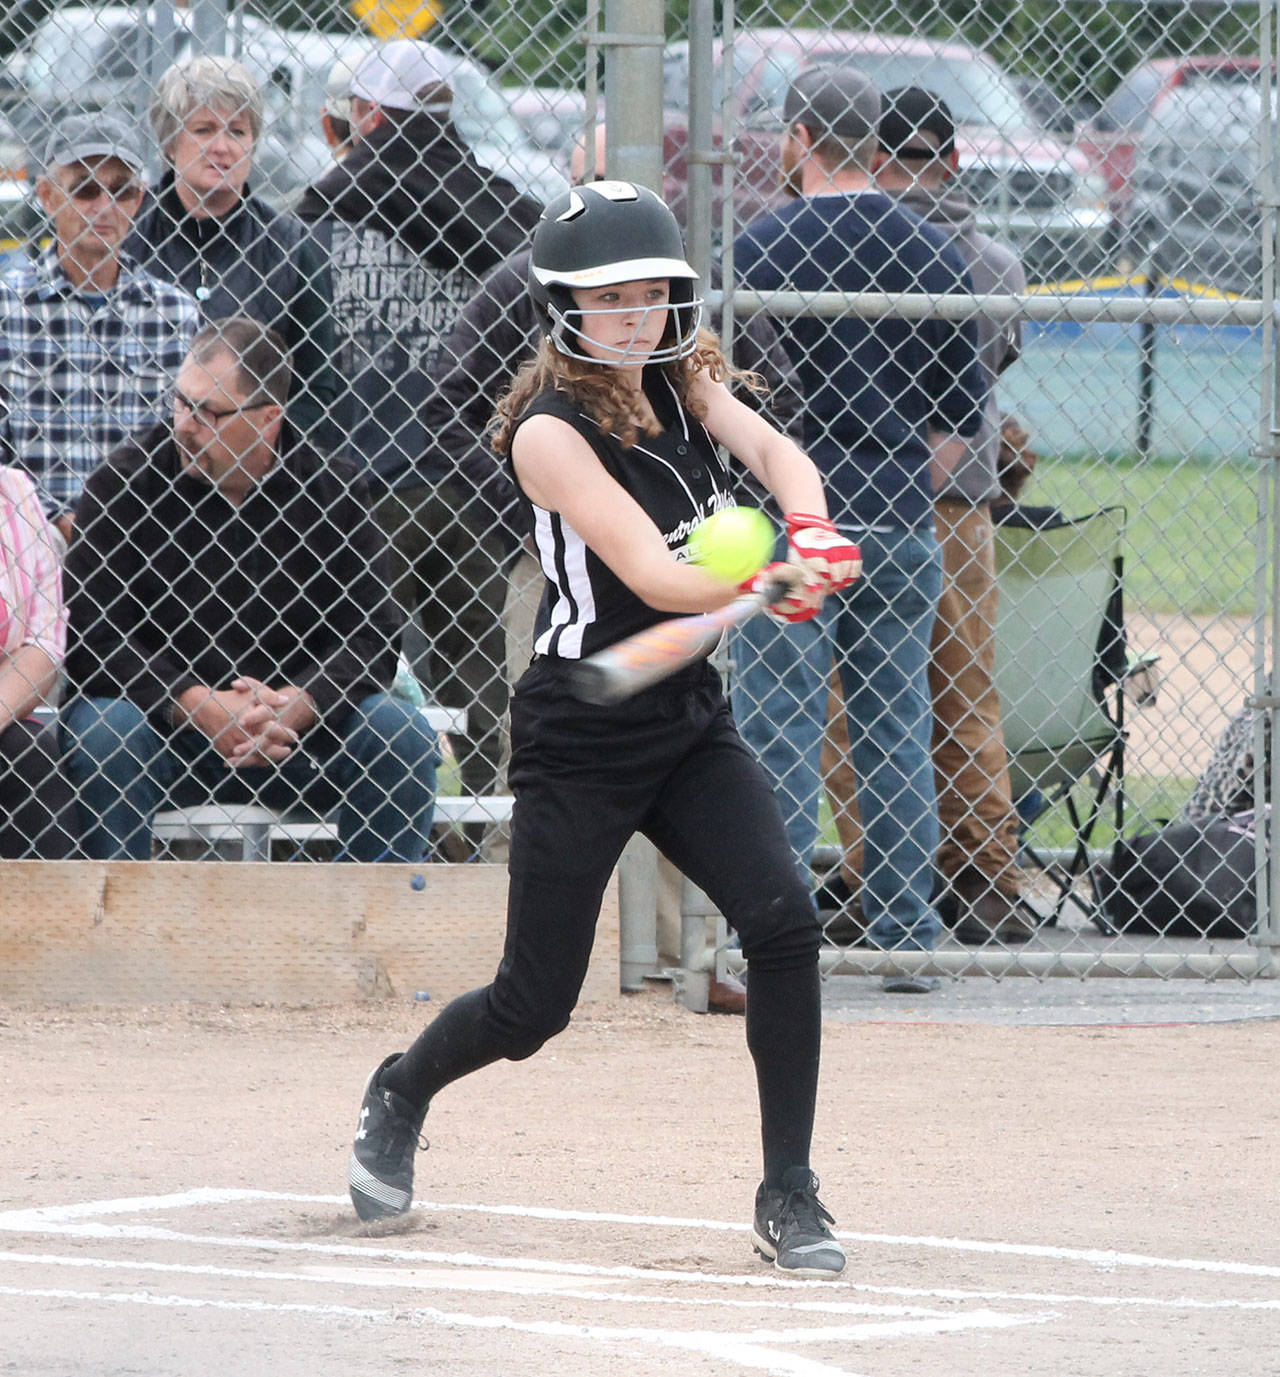 Gwen Gustafson leads of the game with a base hit.(Photo by Jim Waller/Whidbey News-Times)